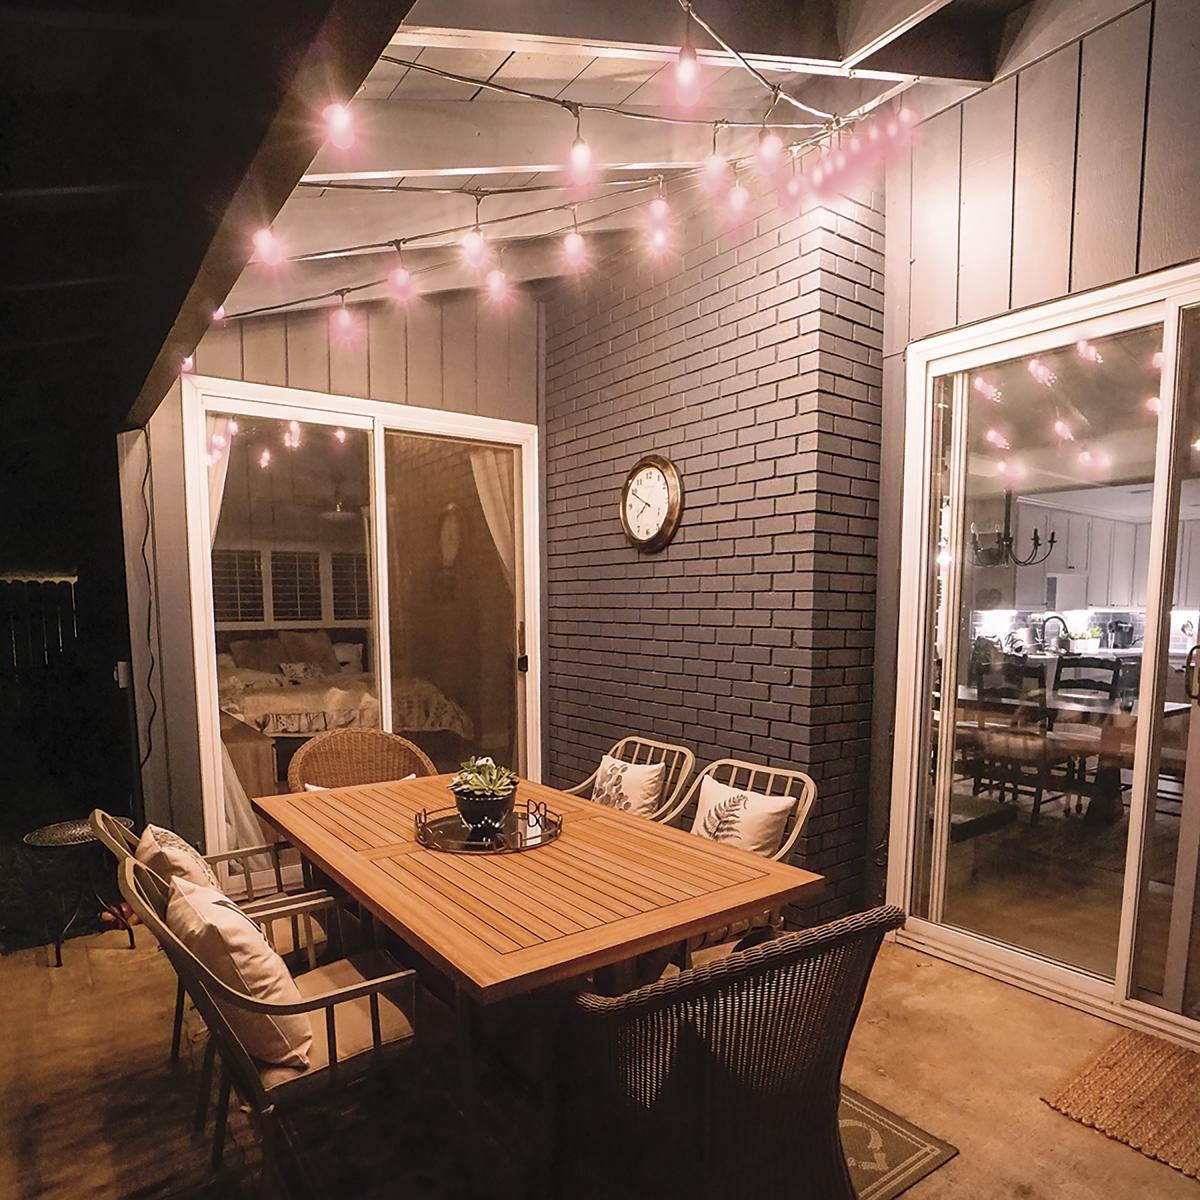 48 Feet LED String Light, 15 S14 bulbs, RGBW and Tunable White Color Changing with Infrared Remote, Indoor/Outdoor